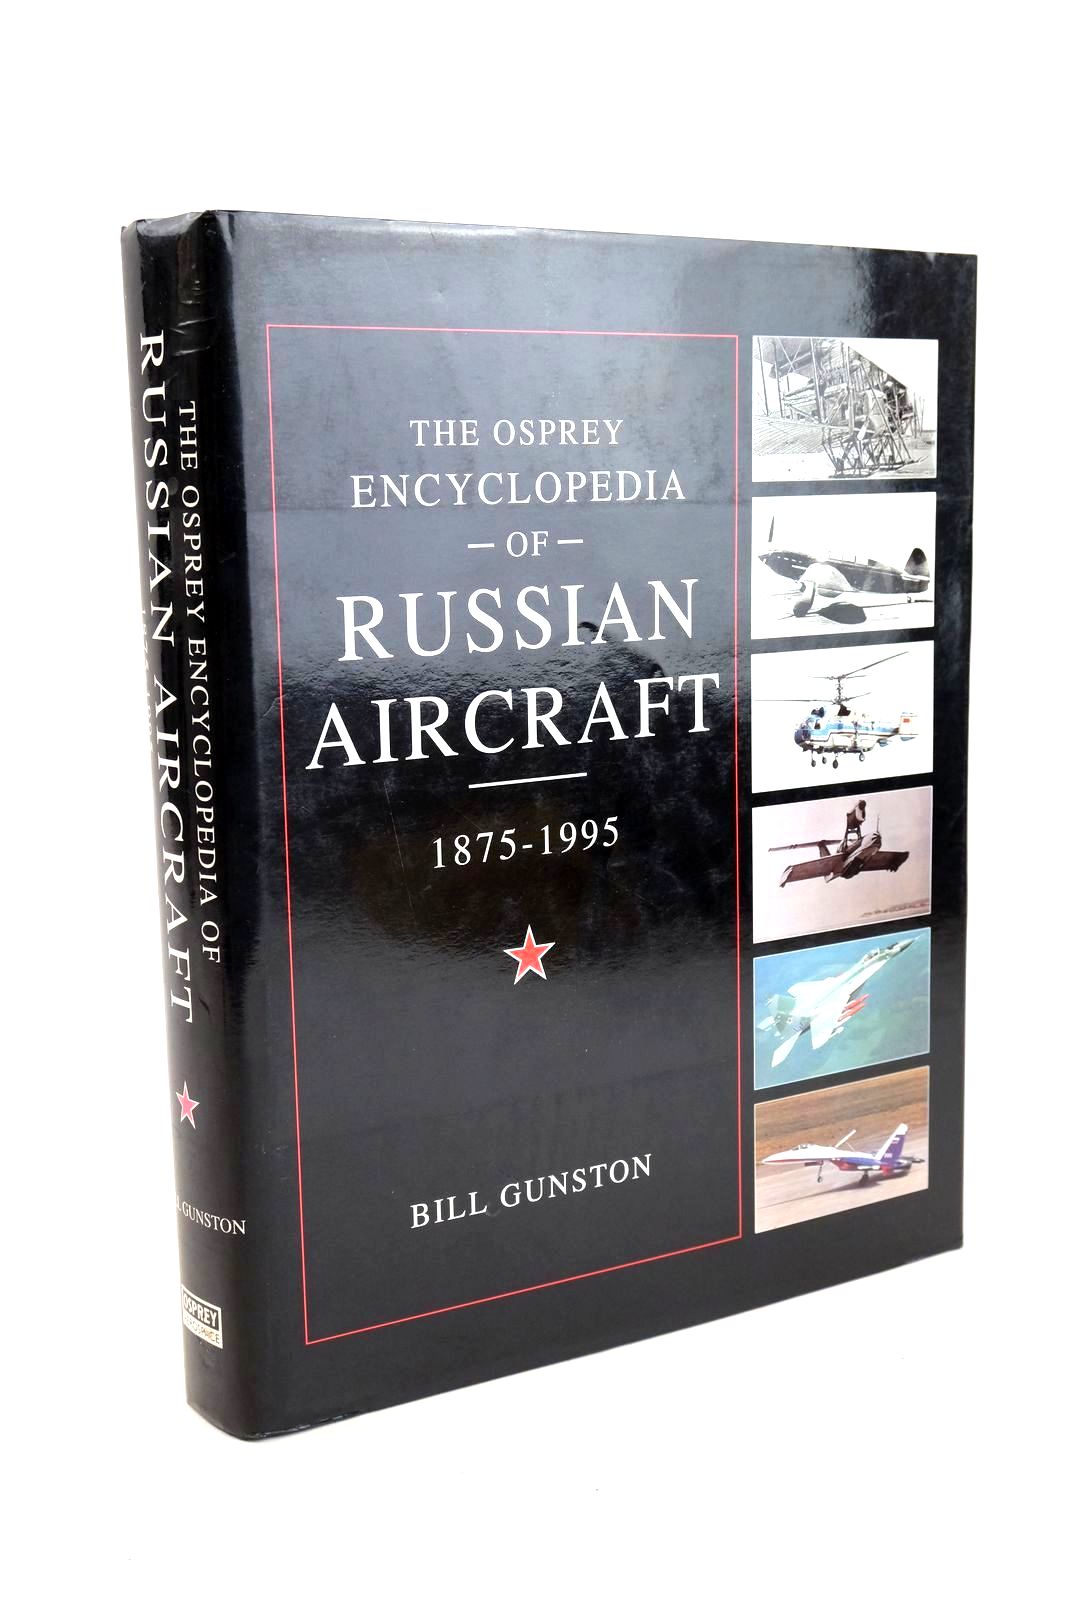 Photo of THE OSPREY ENCYCLOPEDIA OF RUSSIAN AIRCRAFT 1875-1995 written by Gunston, Bill published by Osprey Aerospace (STOCK CODE: 1327958)  for sale by Stella & Rose's Books